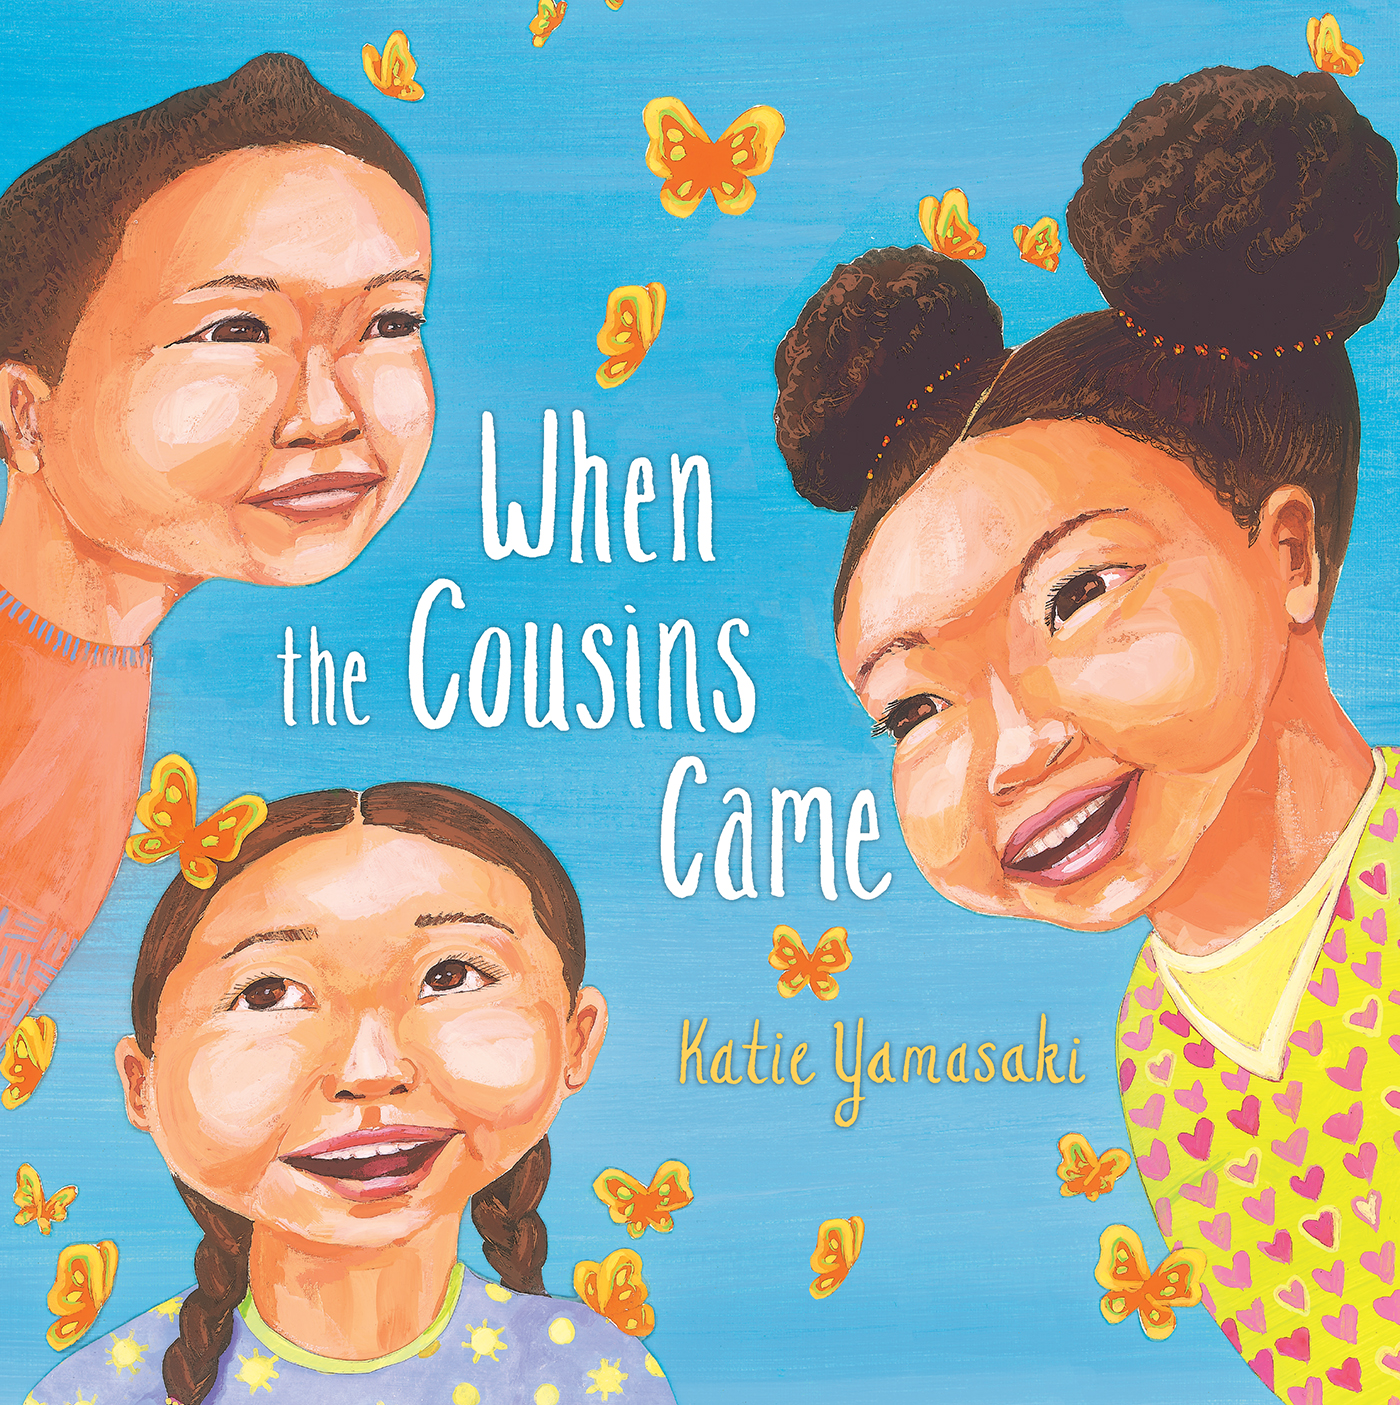 Sunday Story Time with Katie Yamasaki (Author & Illustrator of When the Cousins Came)